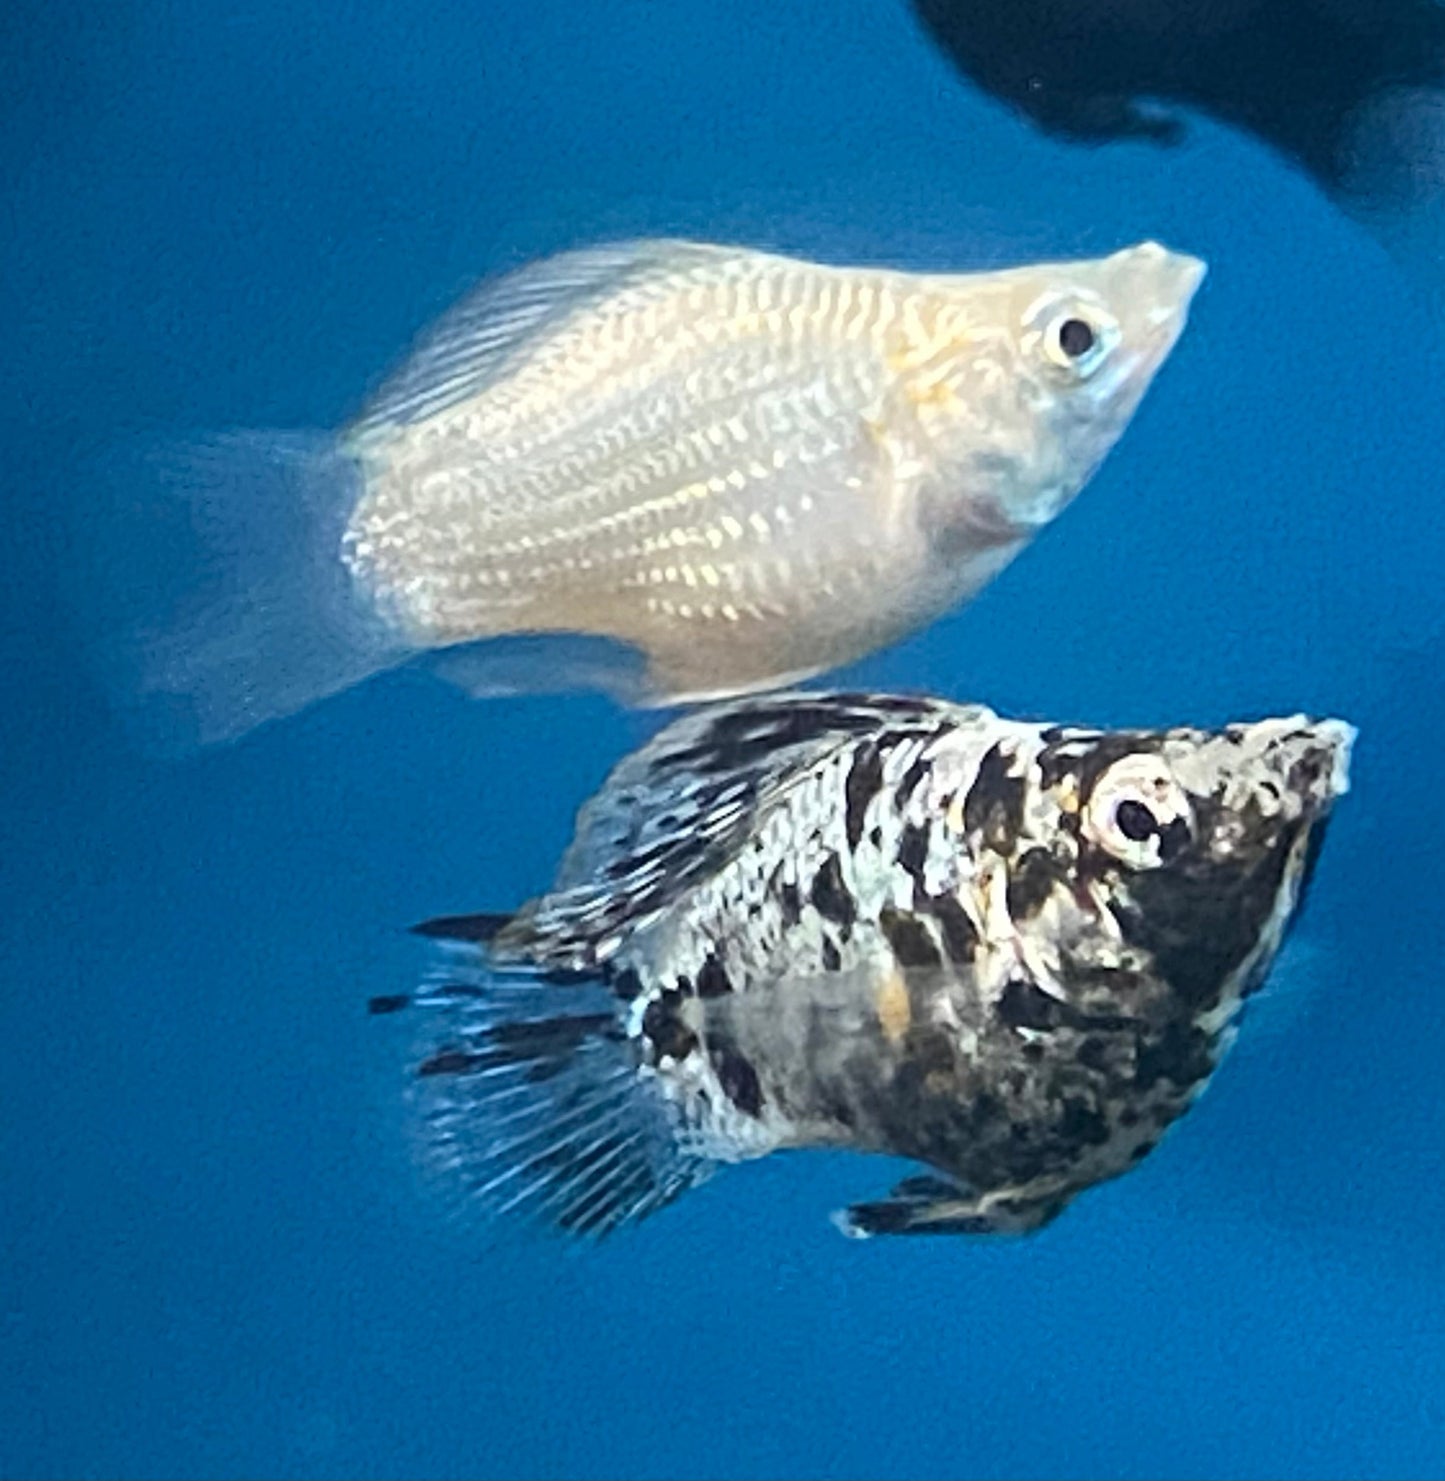 Two Balloon Mollies facing right. The one on top is a Pearl Ballon Molly; the one below is a Dalmatian Balloon Molly.